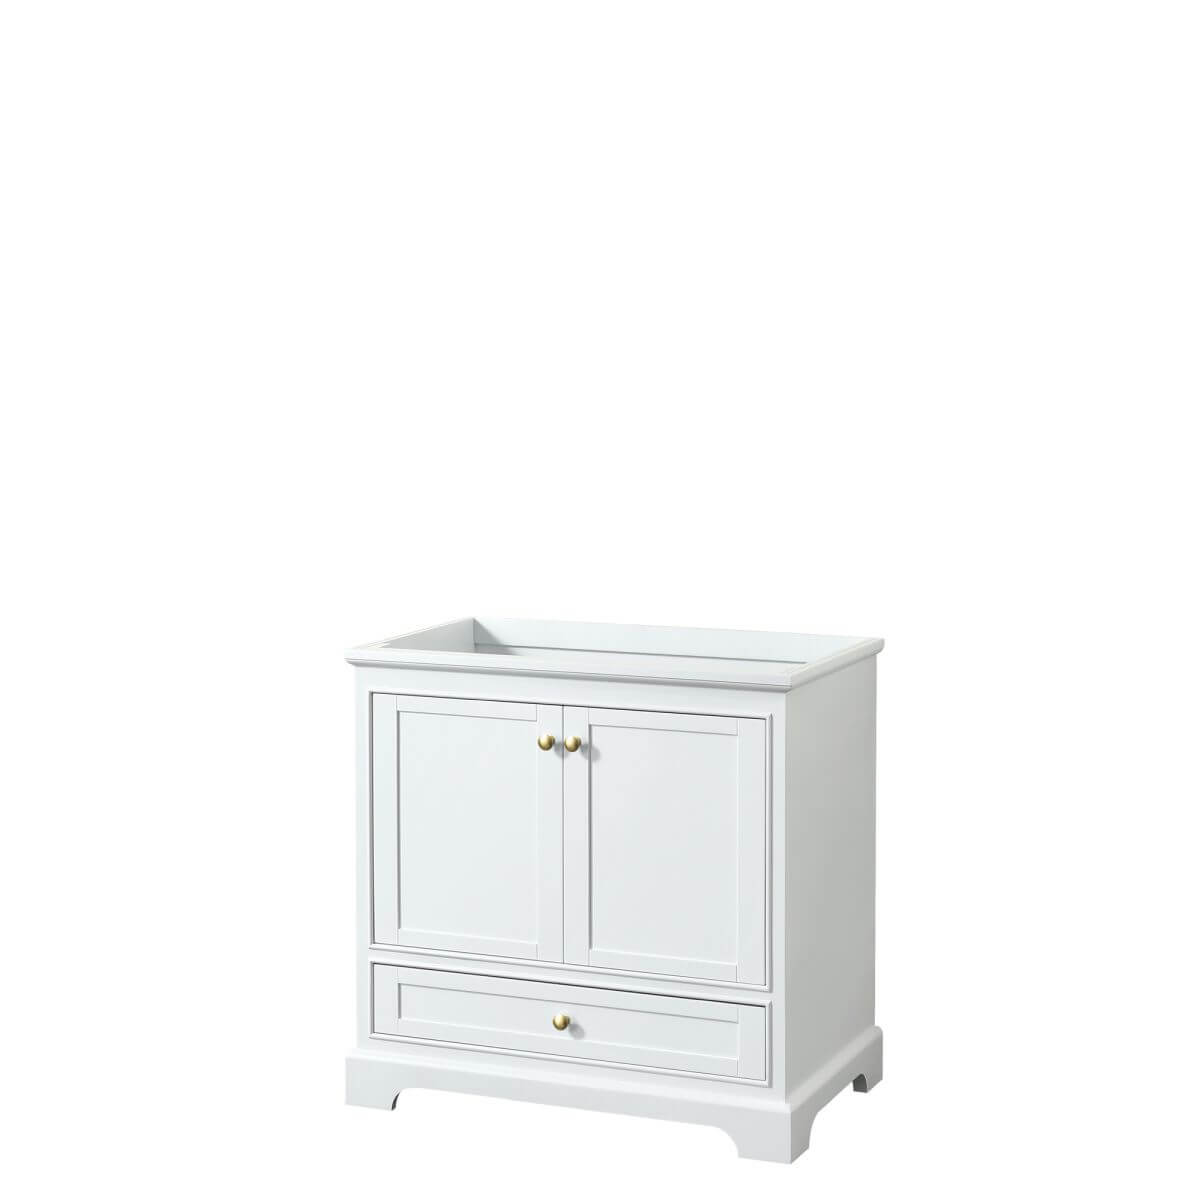 Wyndham Collection Deborah 36 inch Single Bathroom Vanity in White with Brushed Gold Trim, No Countertop, No Sink and No Mirror - WCS202036SWGCXSXXMXX